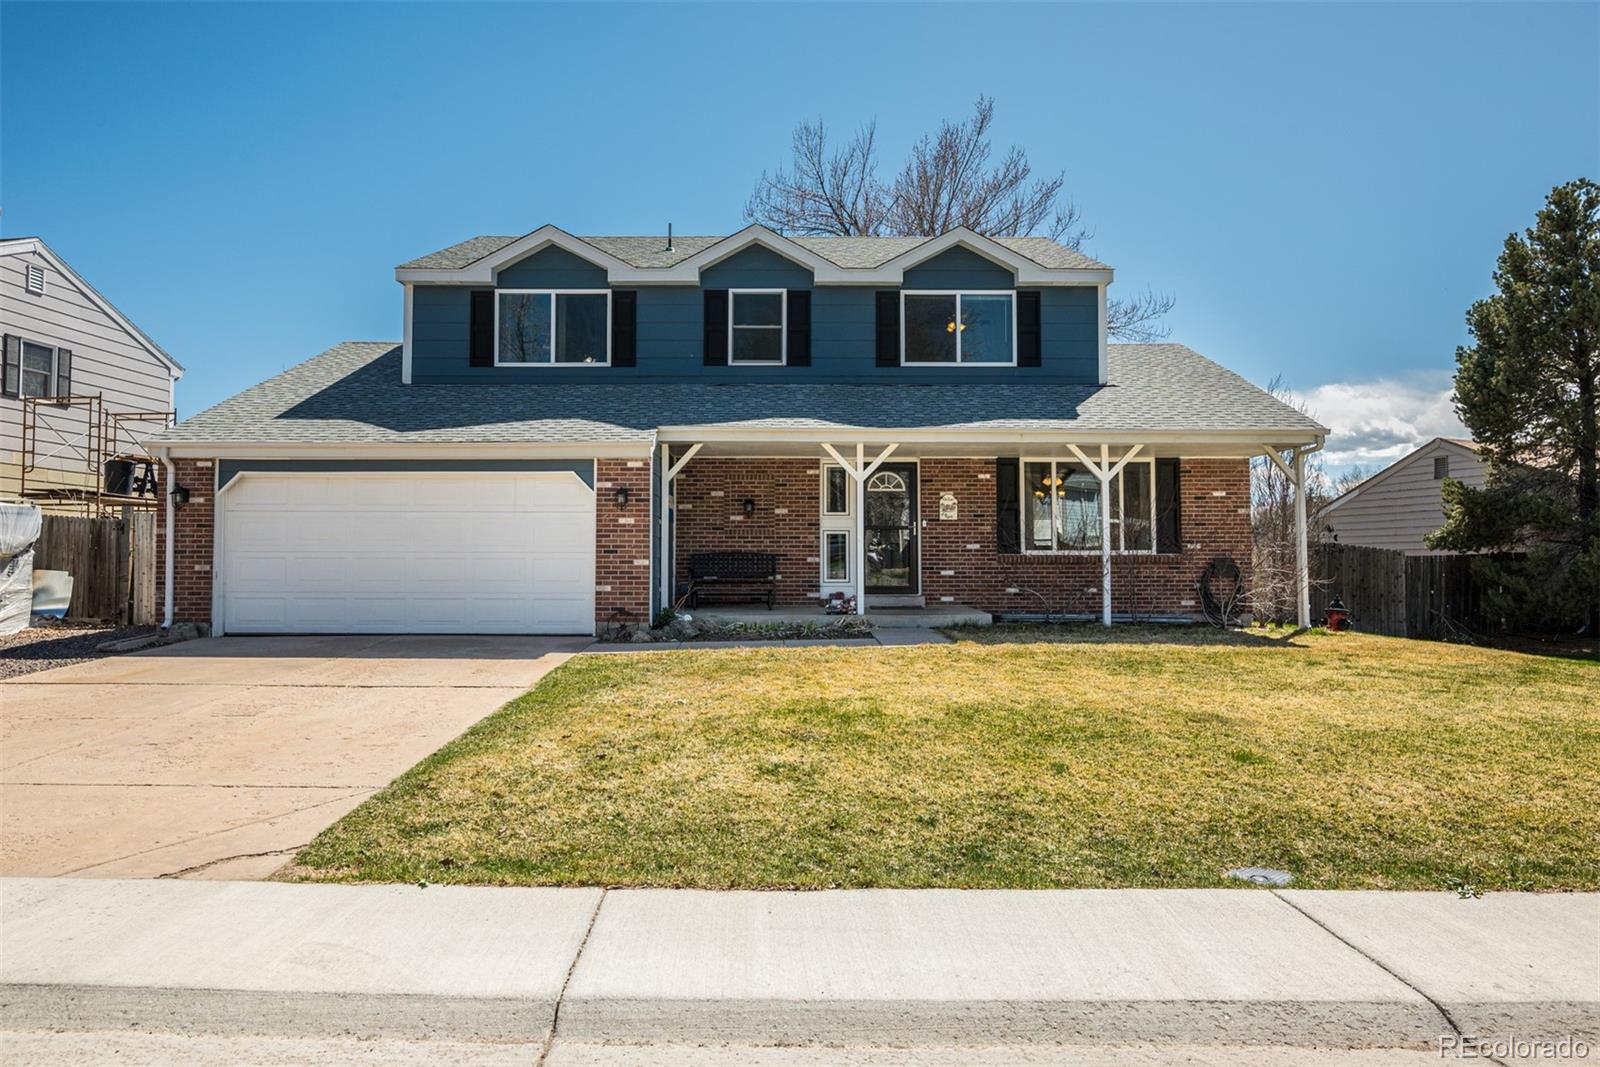 9310 W 81st Place, arvada MLS: 7971470 Beds: 4 Baths: 3 Price: $695,000